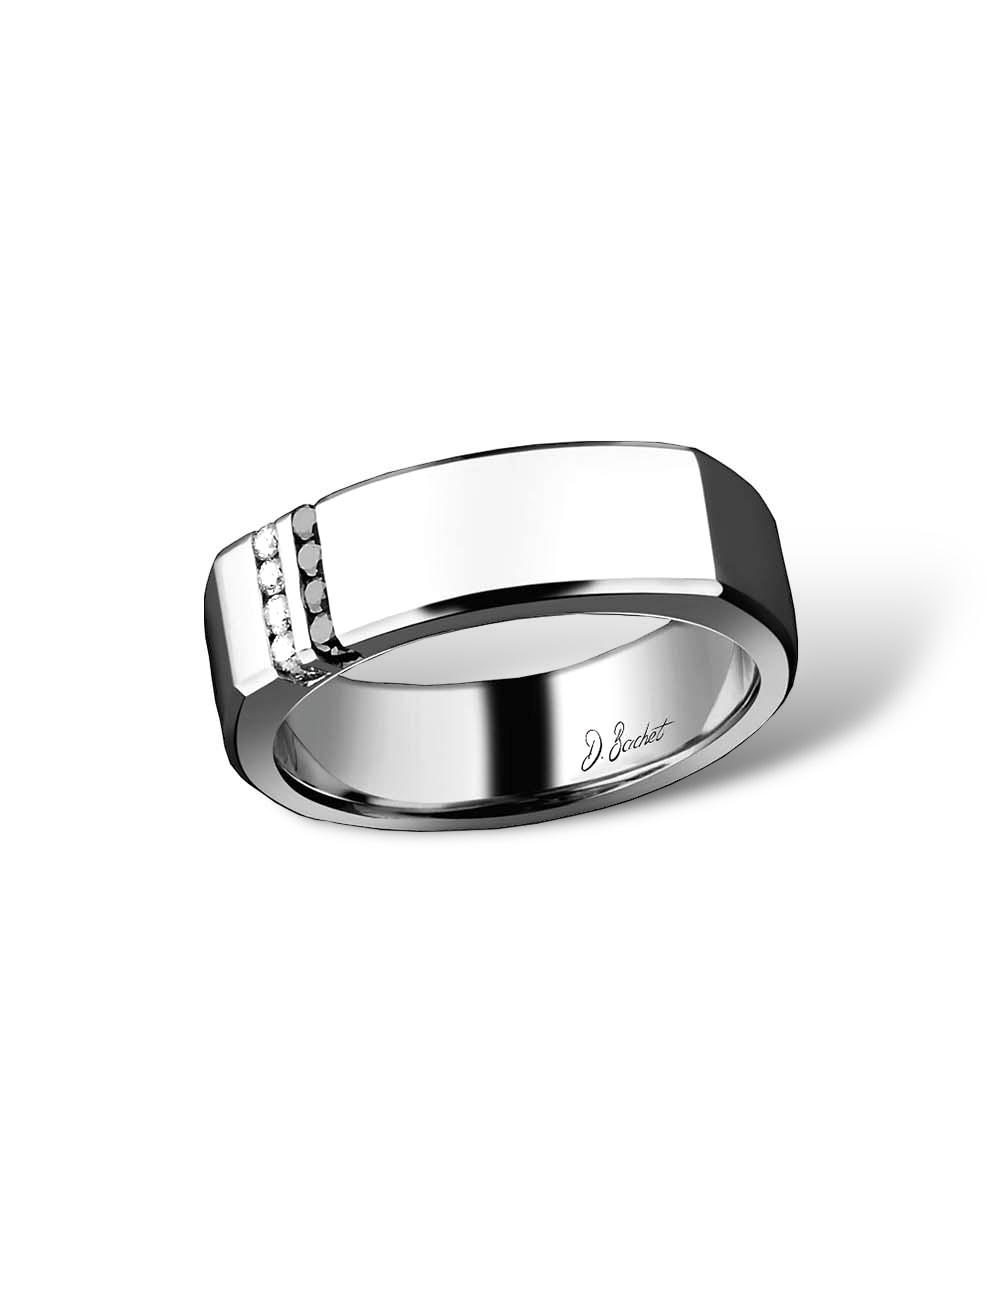 Men's 'Dynamik' ring with white and black diamonds, modern and unique style, perfect for a bold look.